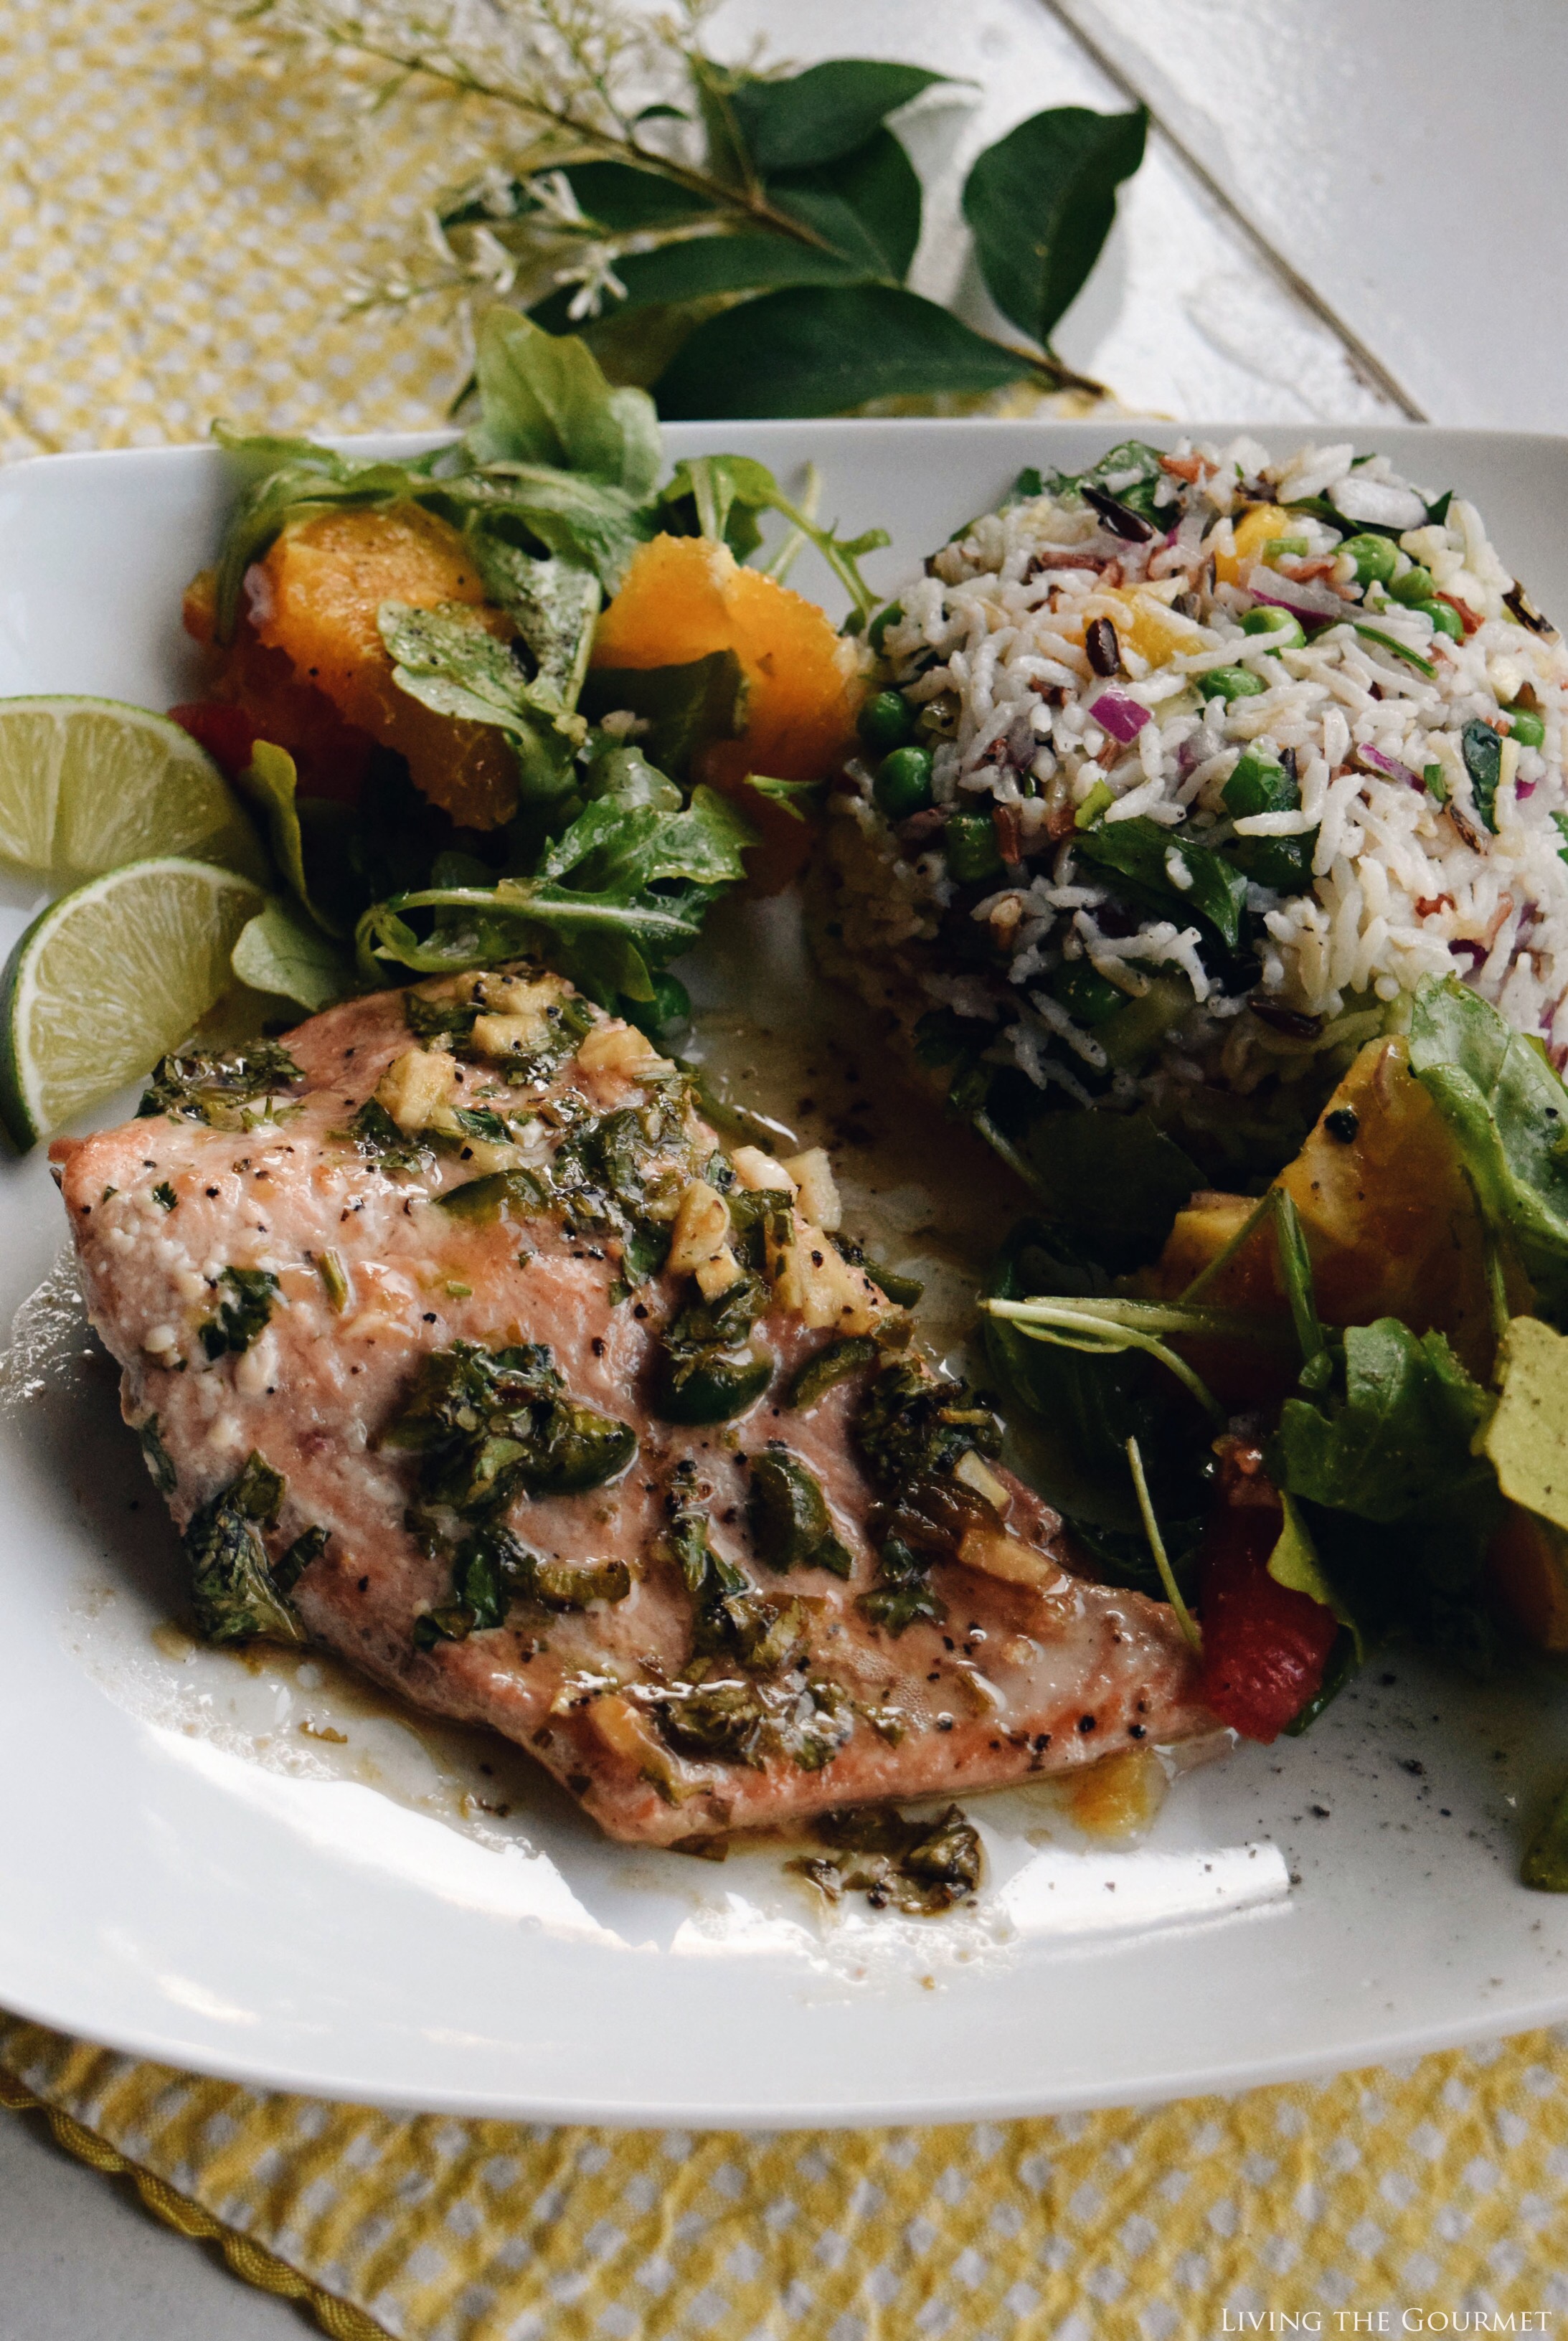 Living the Gourmet: Southwest Style Salmon